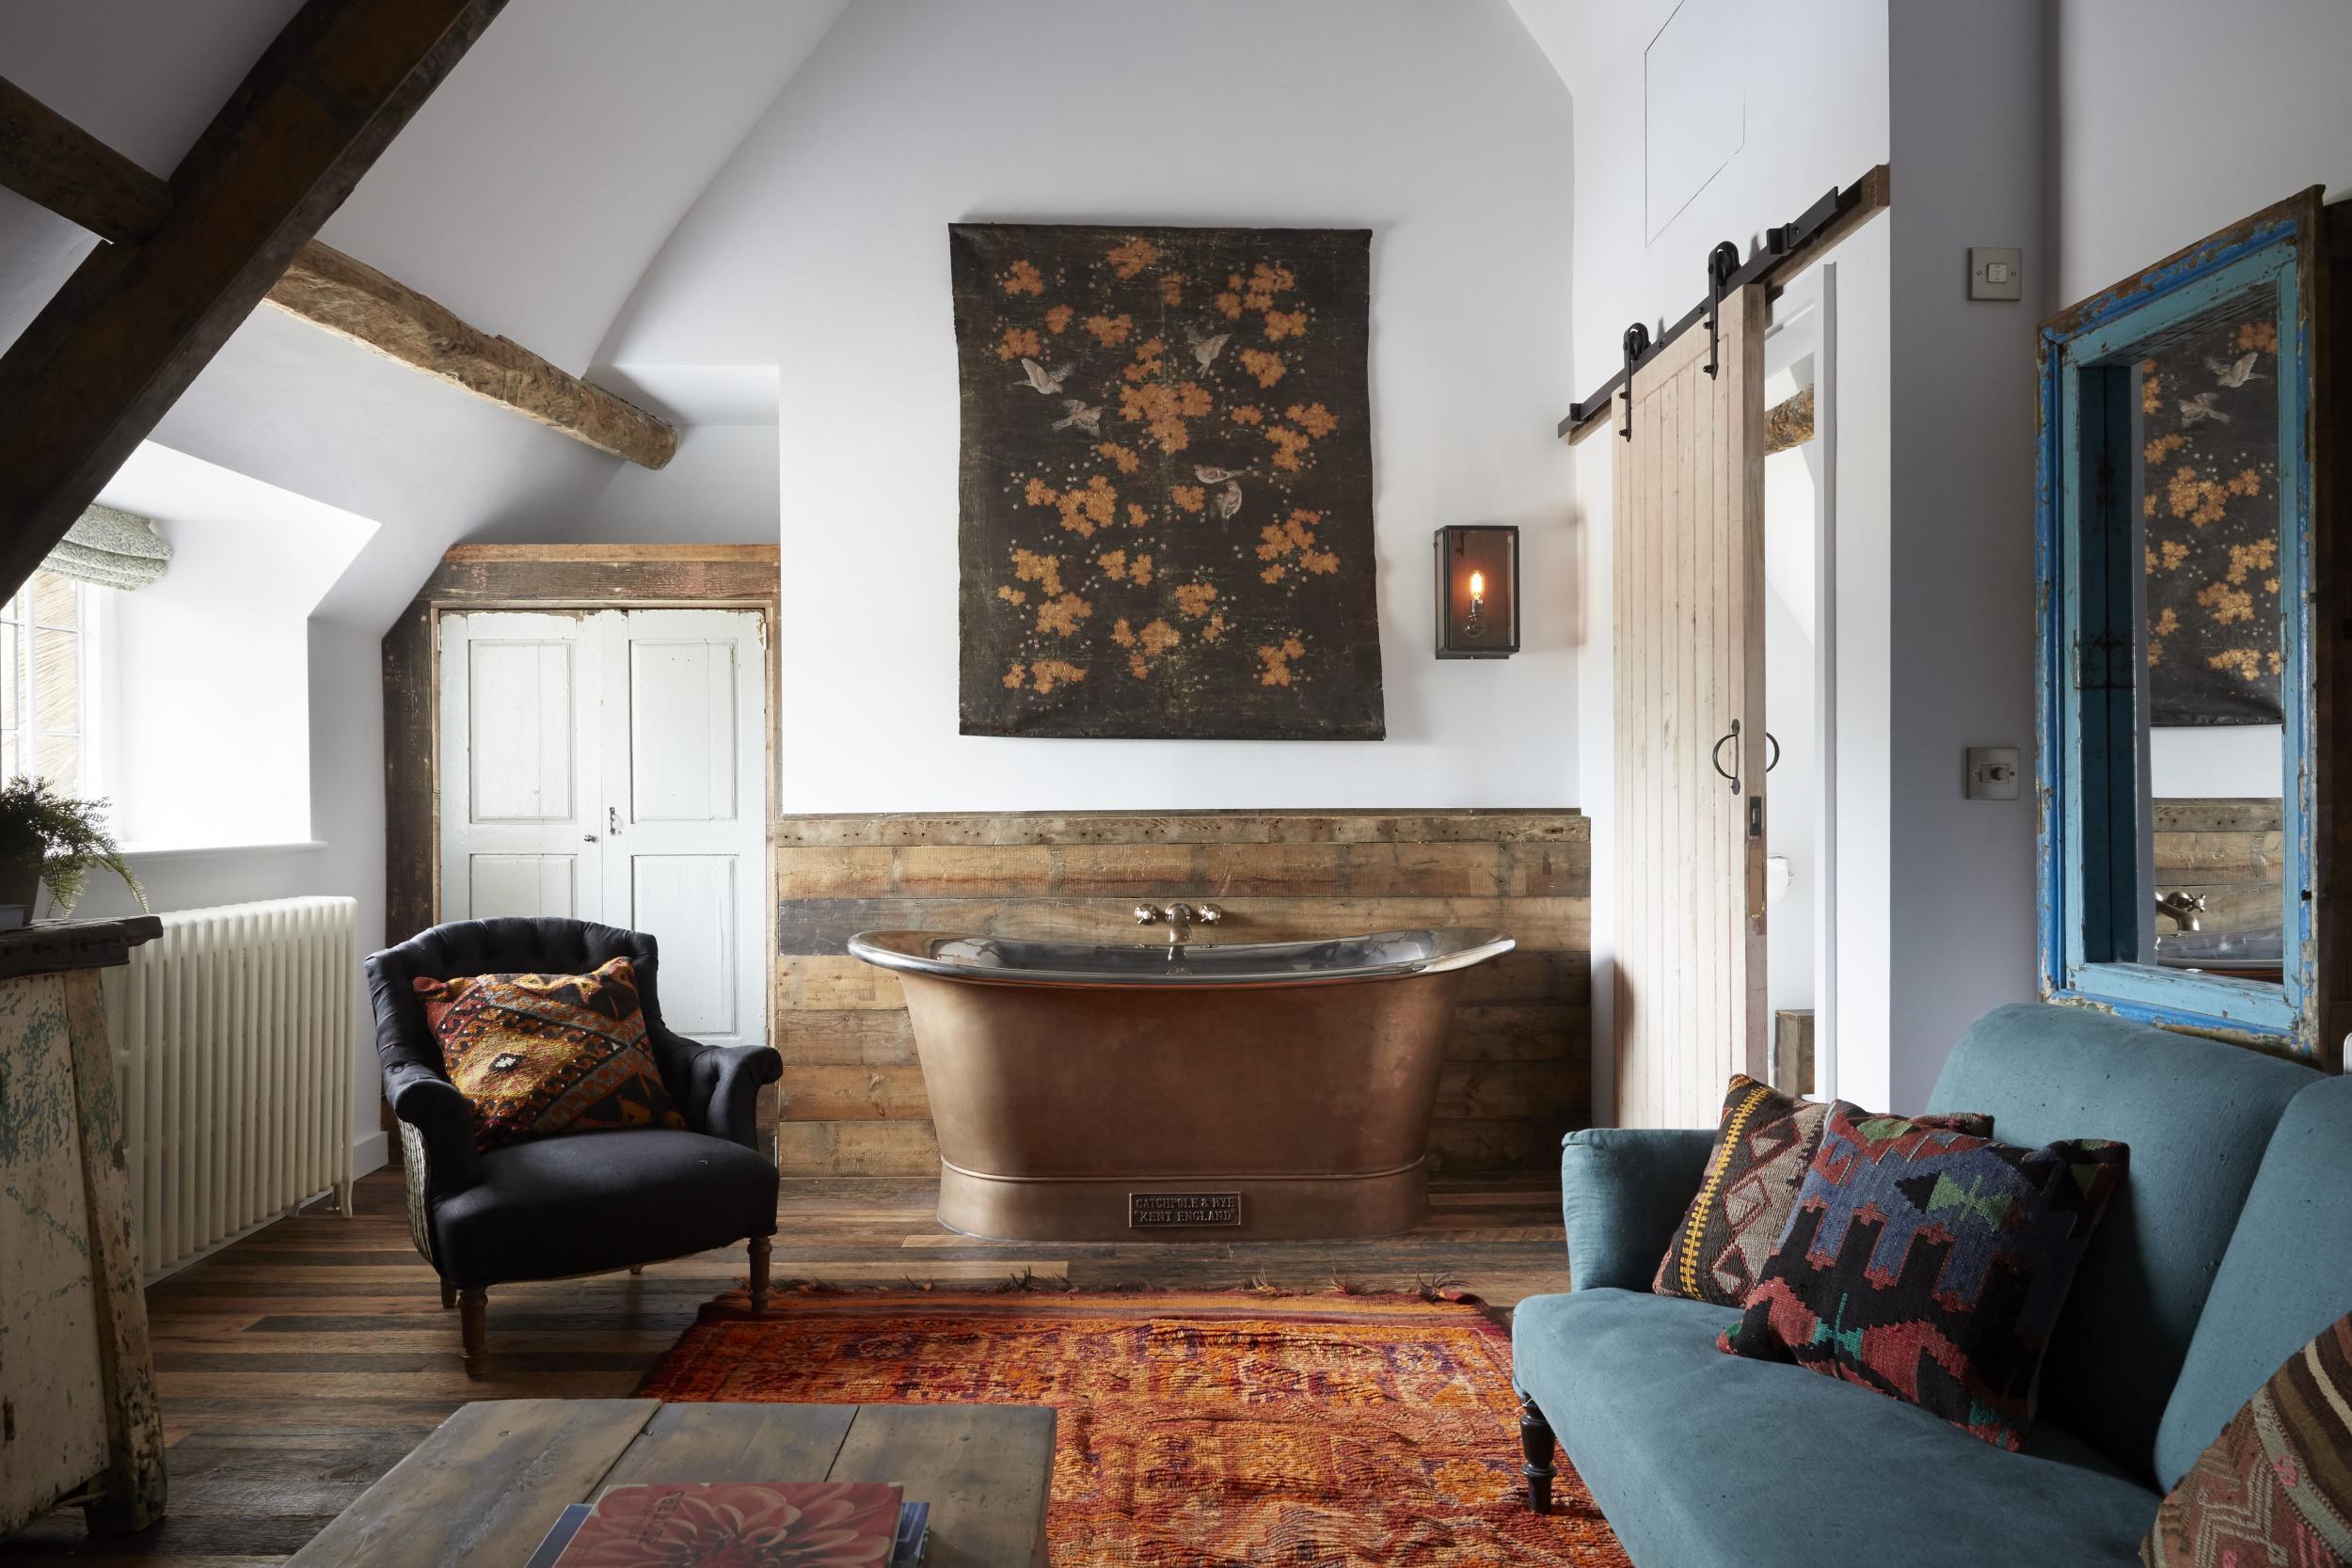 Rooms are livened up with things like freestanding copper baths